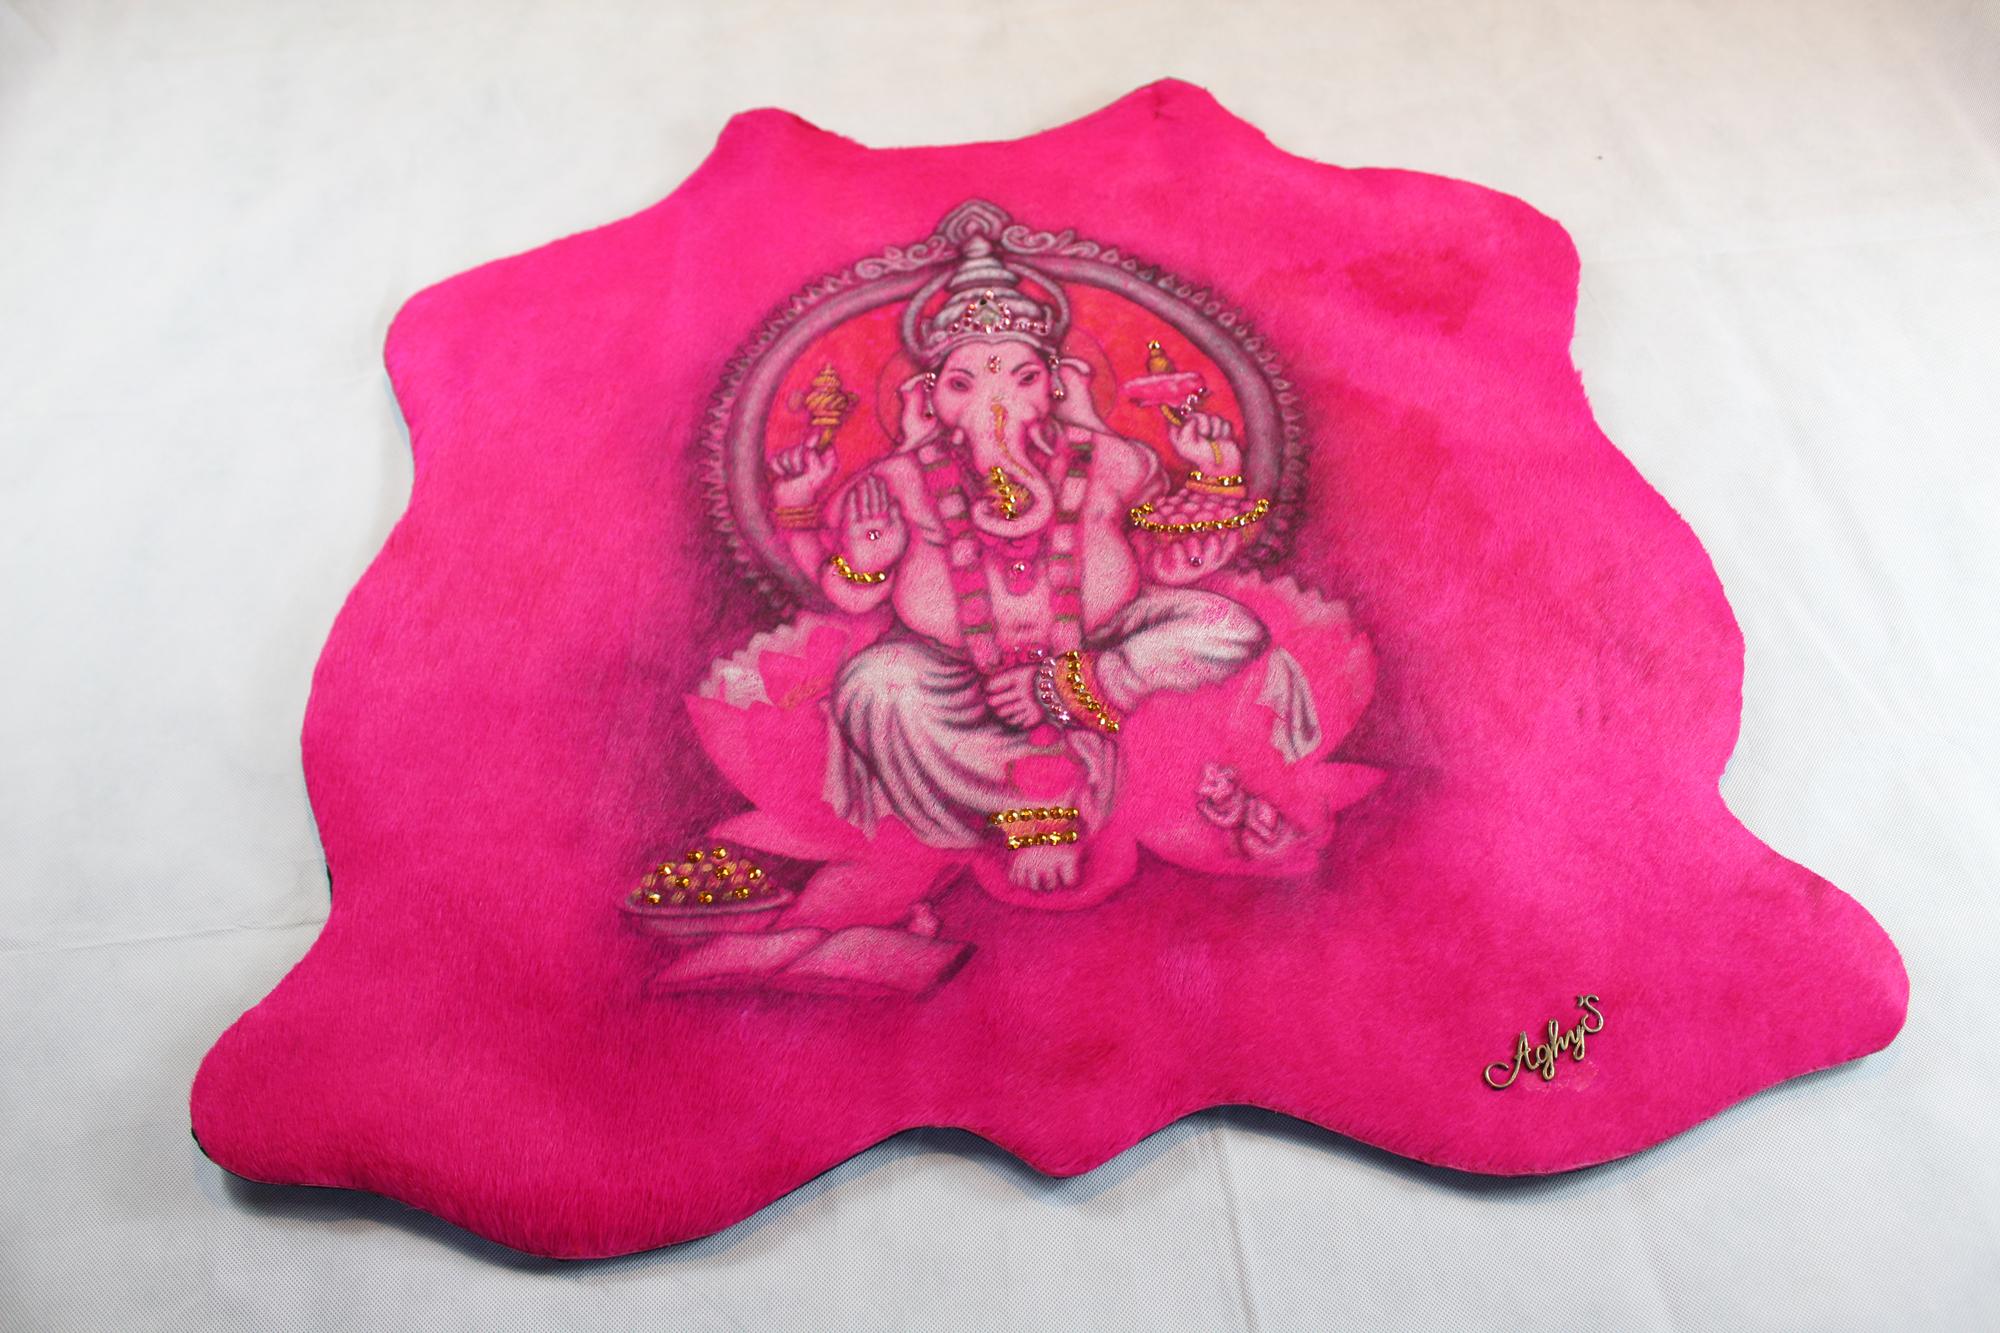 Hand-painted cow leather fuchisa tapestry, Ganesh figure.
Dressed with Swarovski pink and ambers. Back lined with coordinated fabric black with flowers oriental style.
Entirely made in Italy.

The item listed is ready for shipment.
Custom